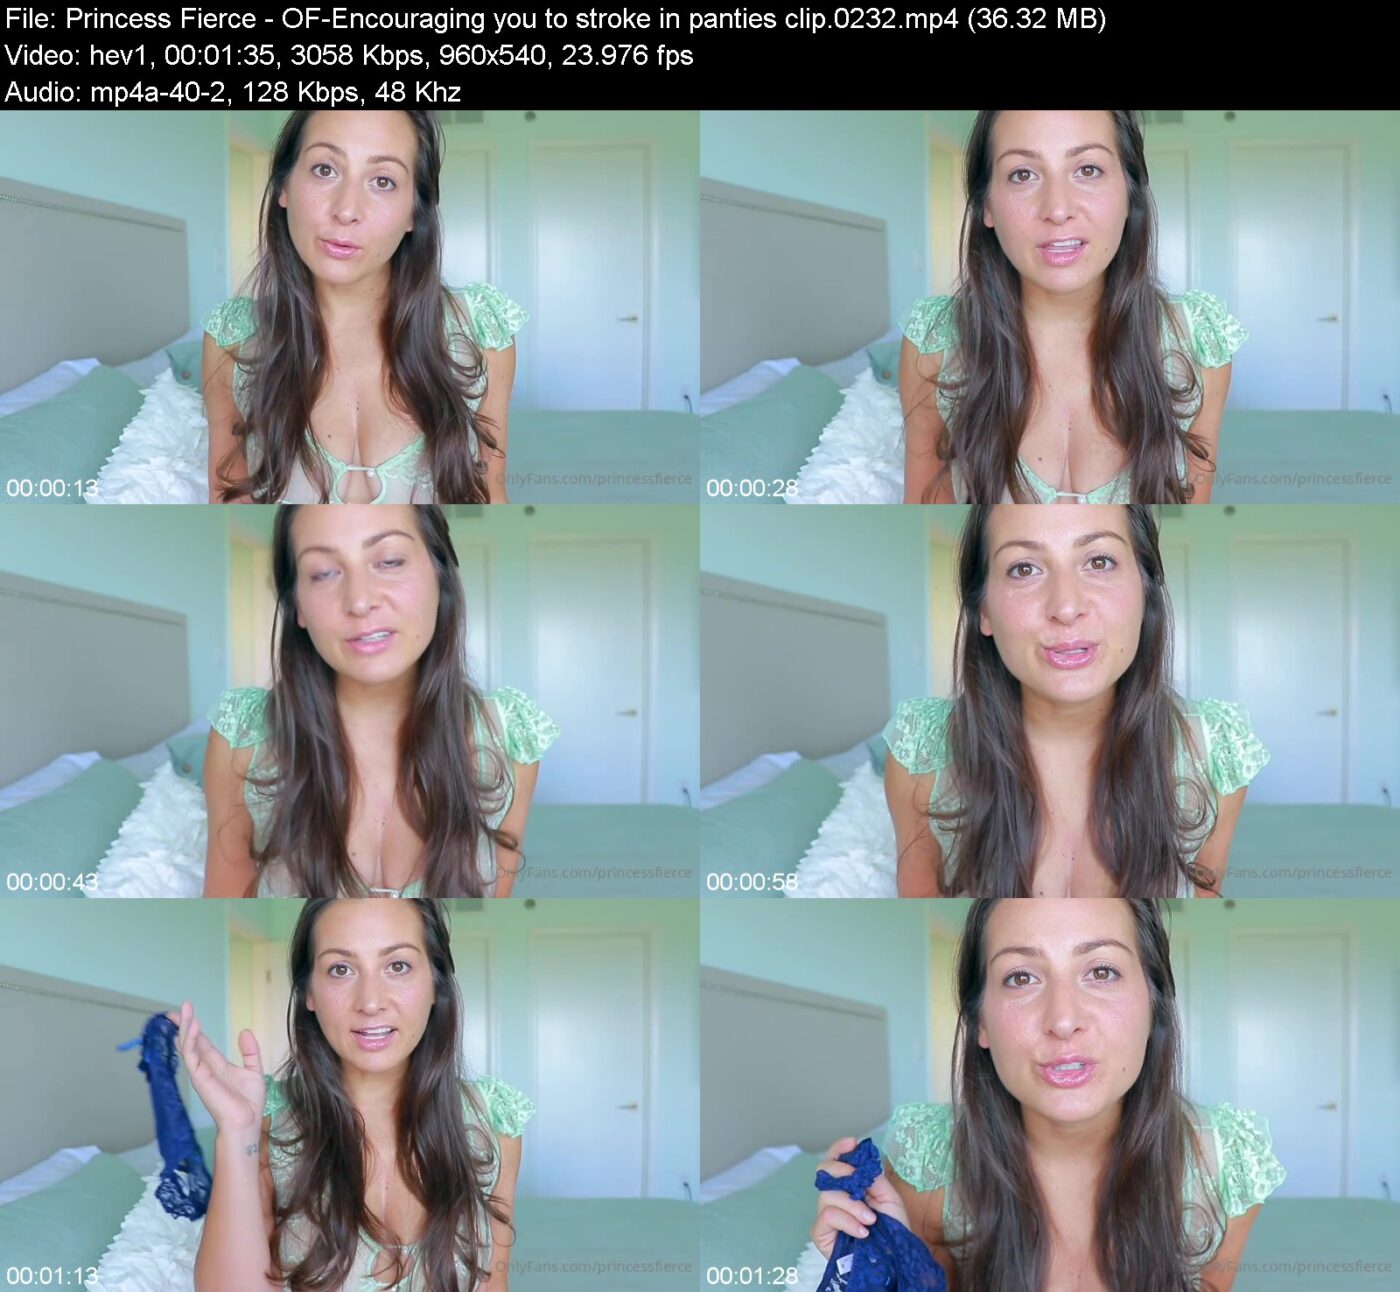 Actress: Princess Fierce. Title and Studio: OF-Encouraging you to stroke in panties clip.0232